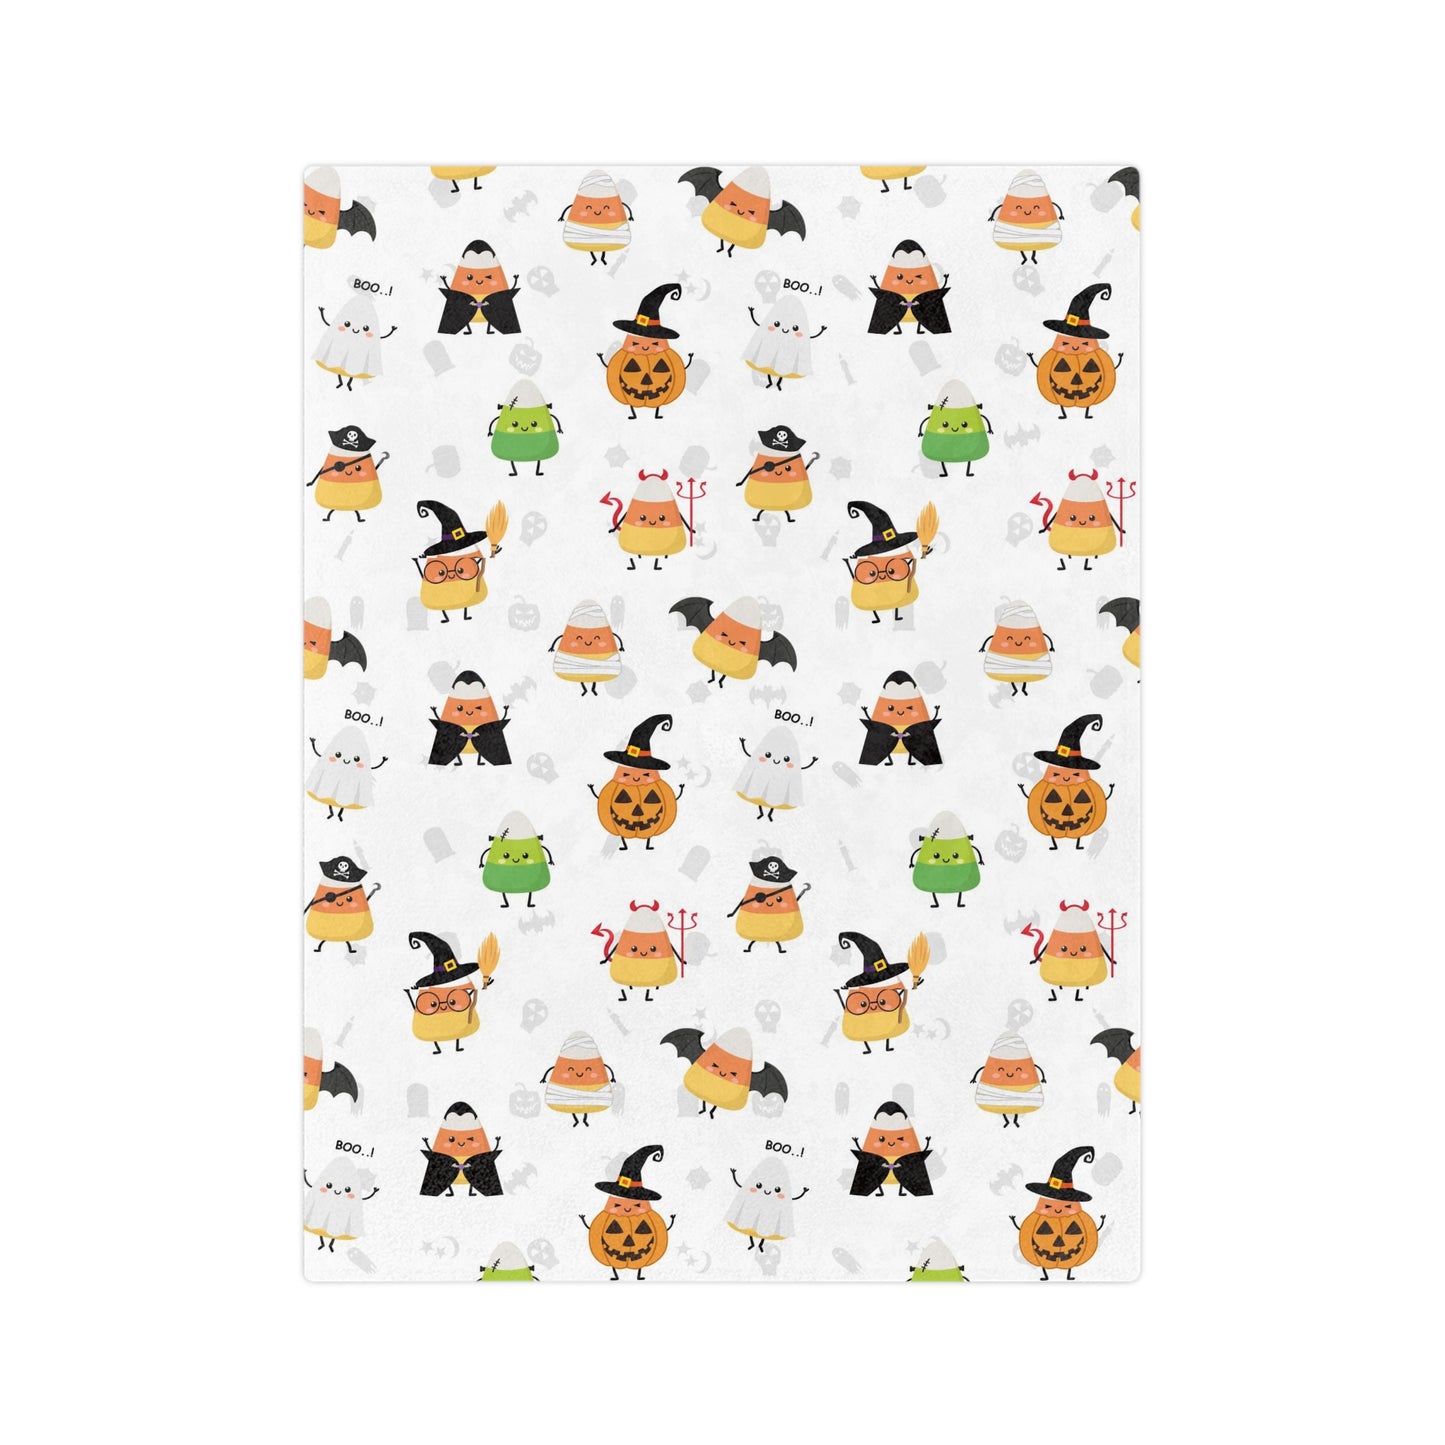 Halloween Blanket with candy corn for spooky season. Candy corns with Halloween costumes for Halloween lovers